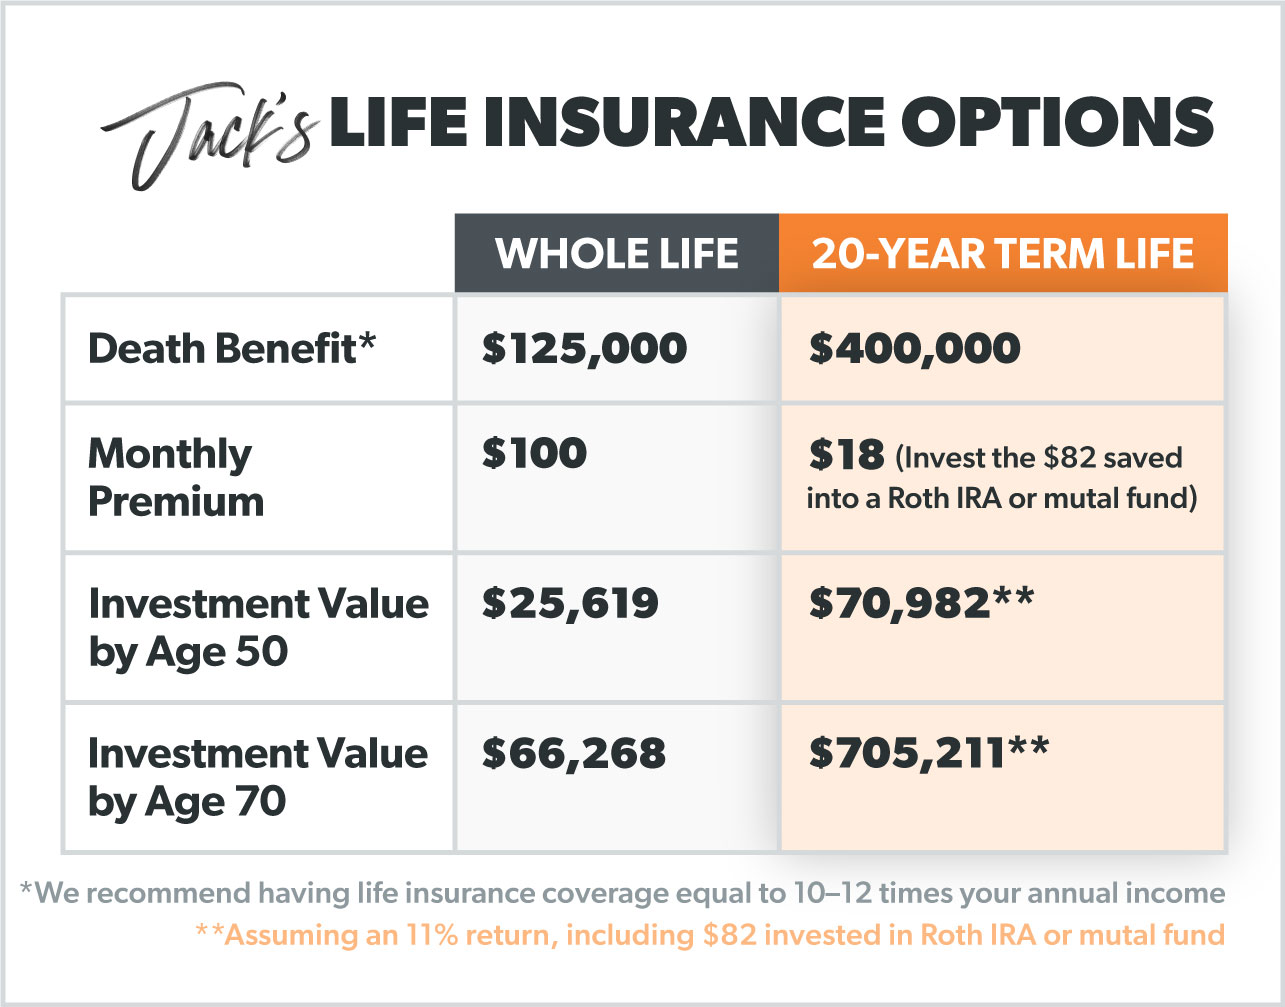 how to calculate cash value of life insurance policy?